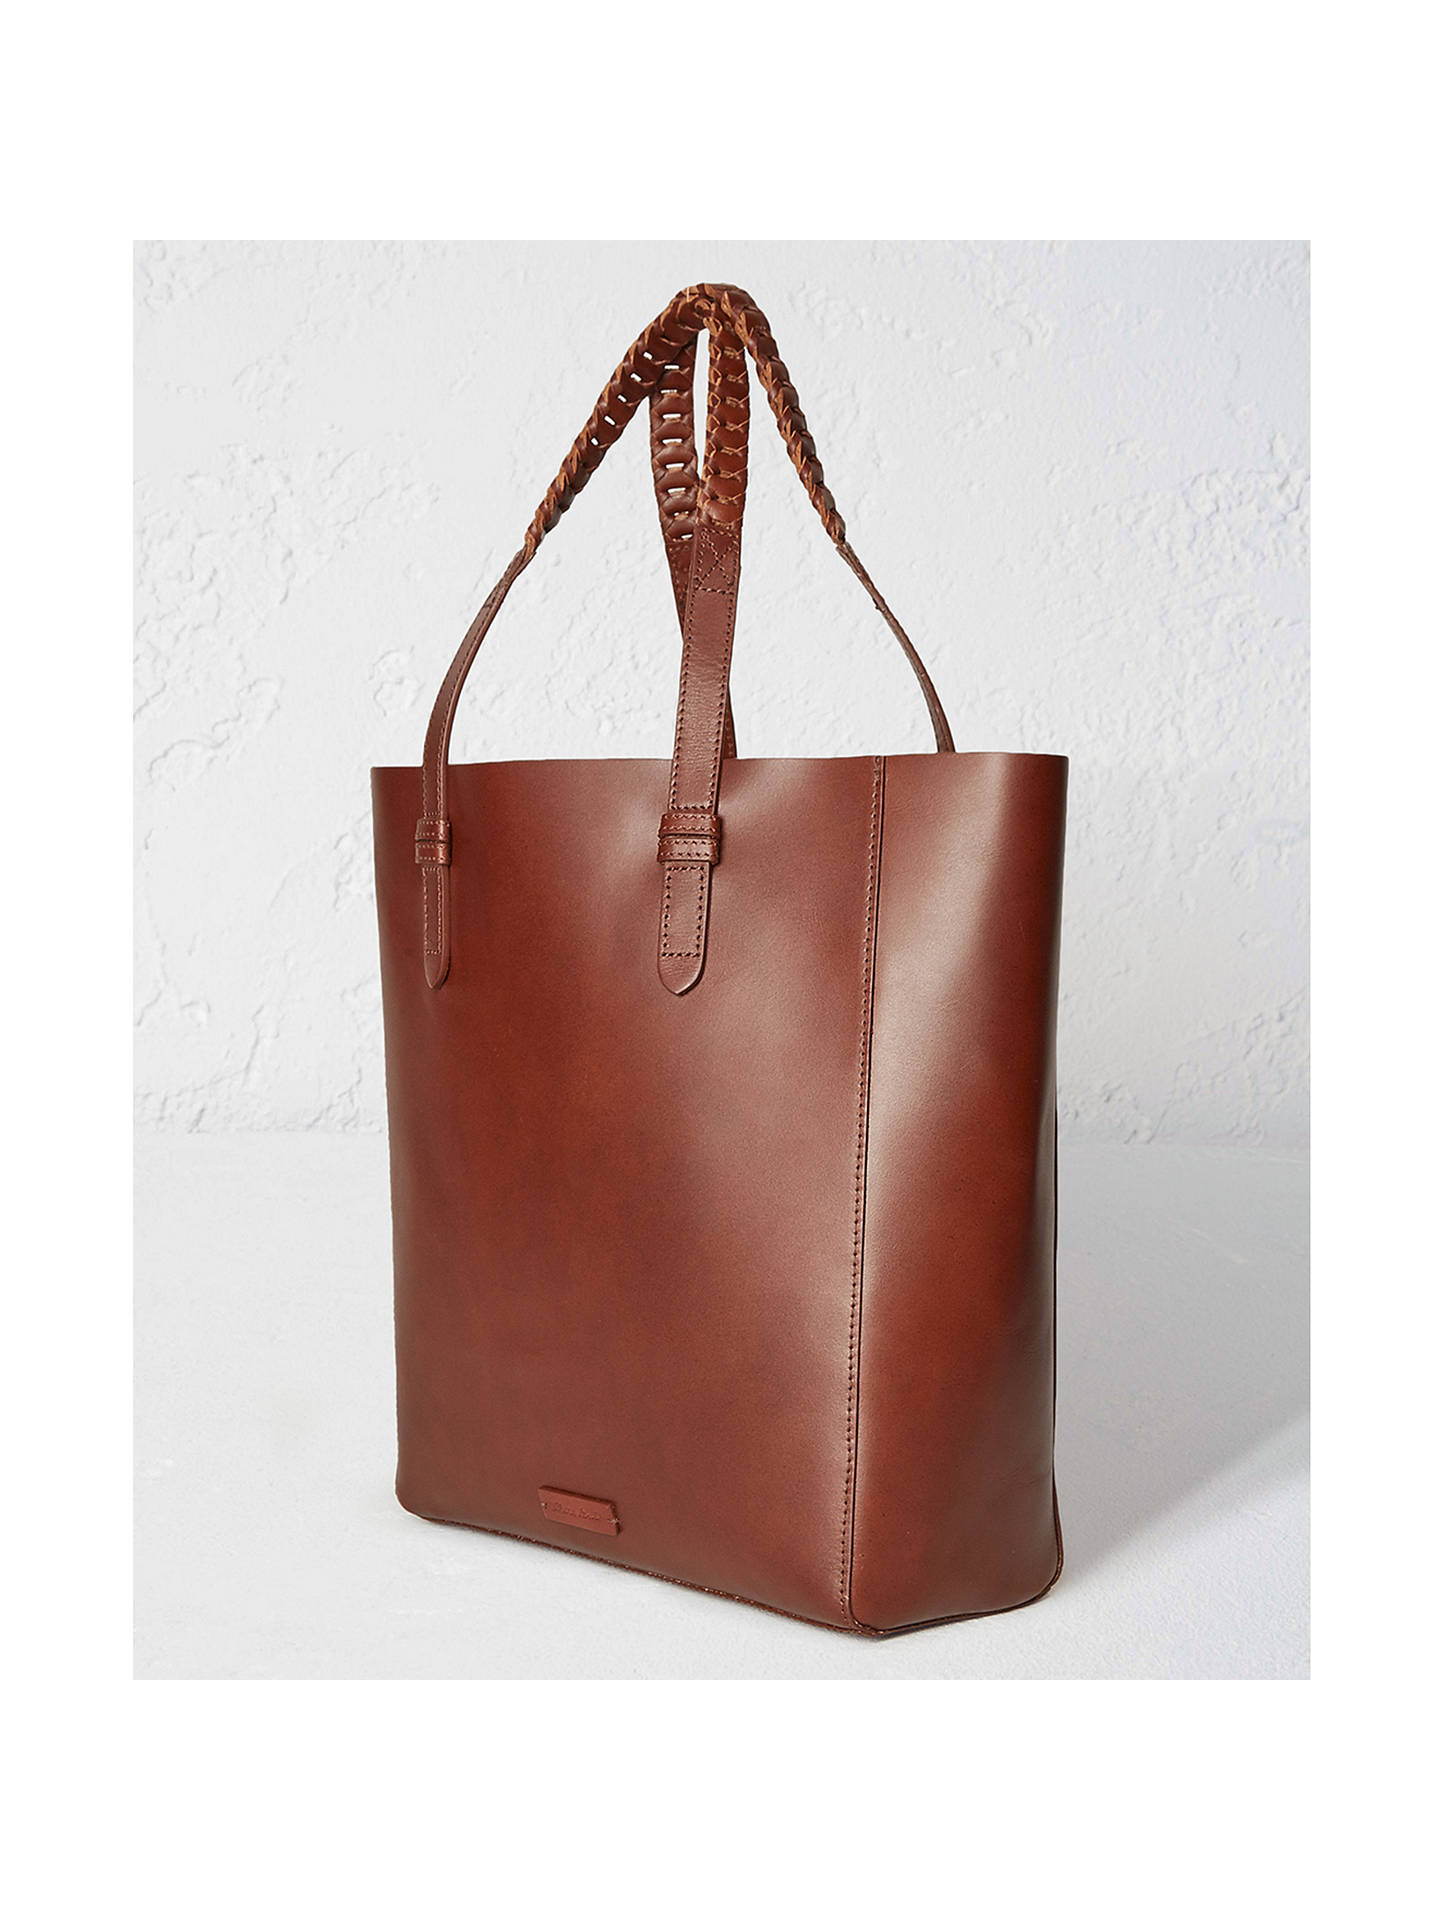 White Stuff Classic Leather Tote Bag at John Lewis & Partners